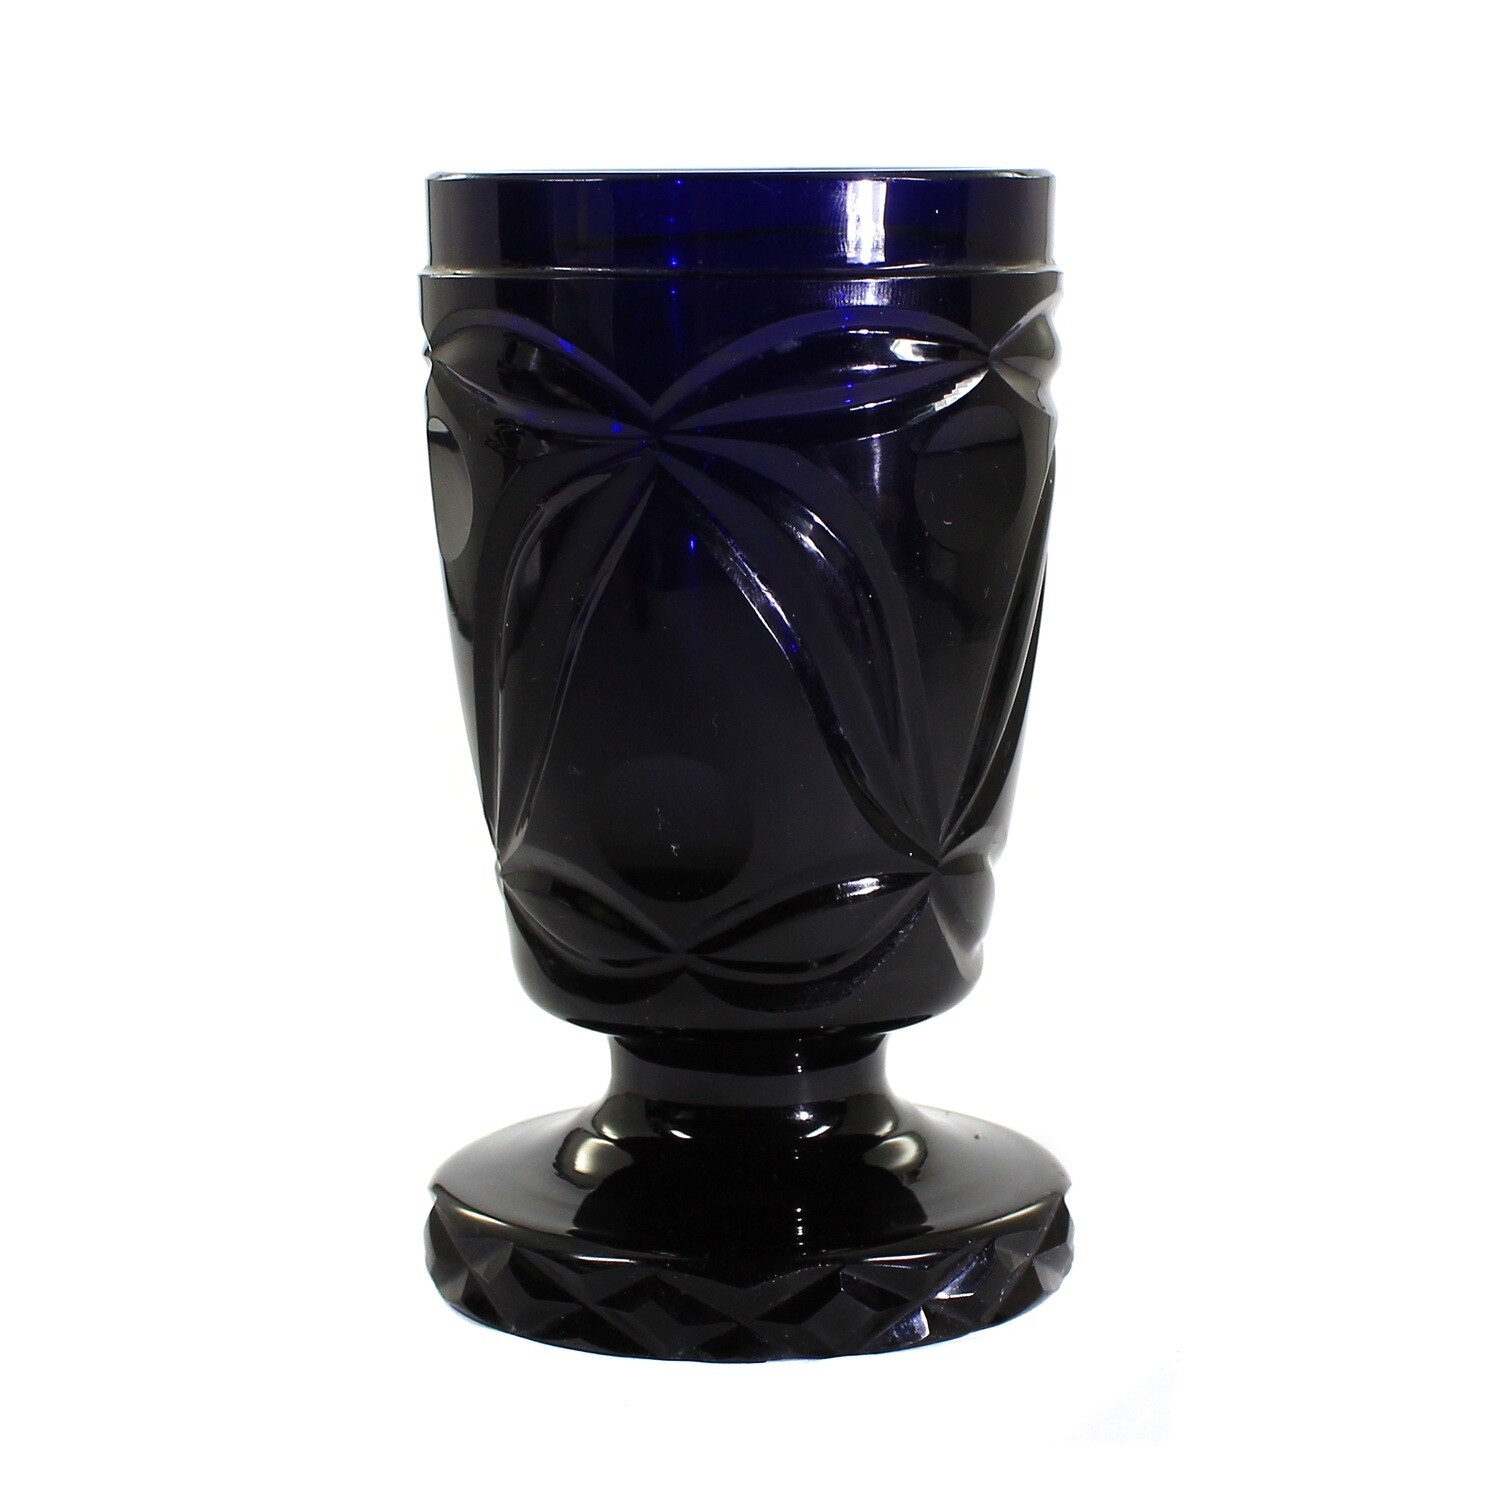 Heavy footed cup made of dark blue glass, Russia or Bohemia around 1840